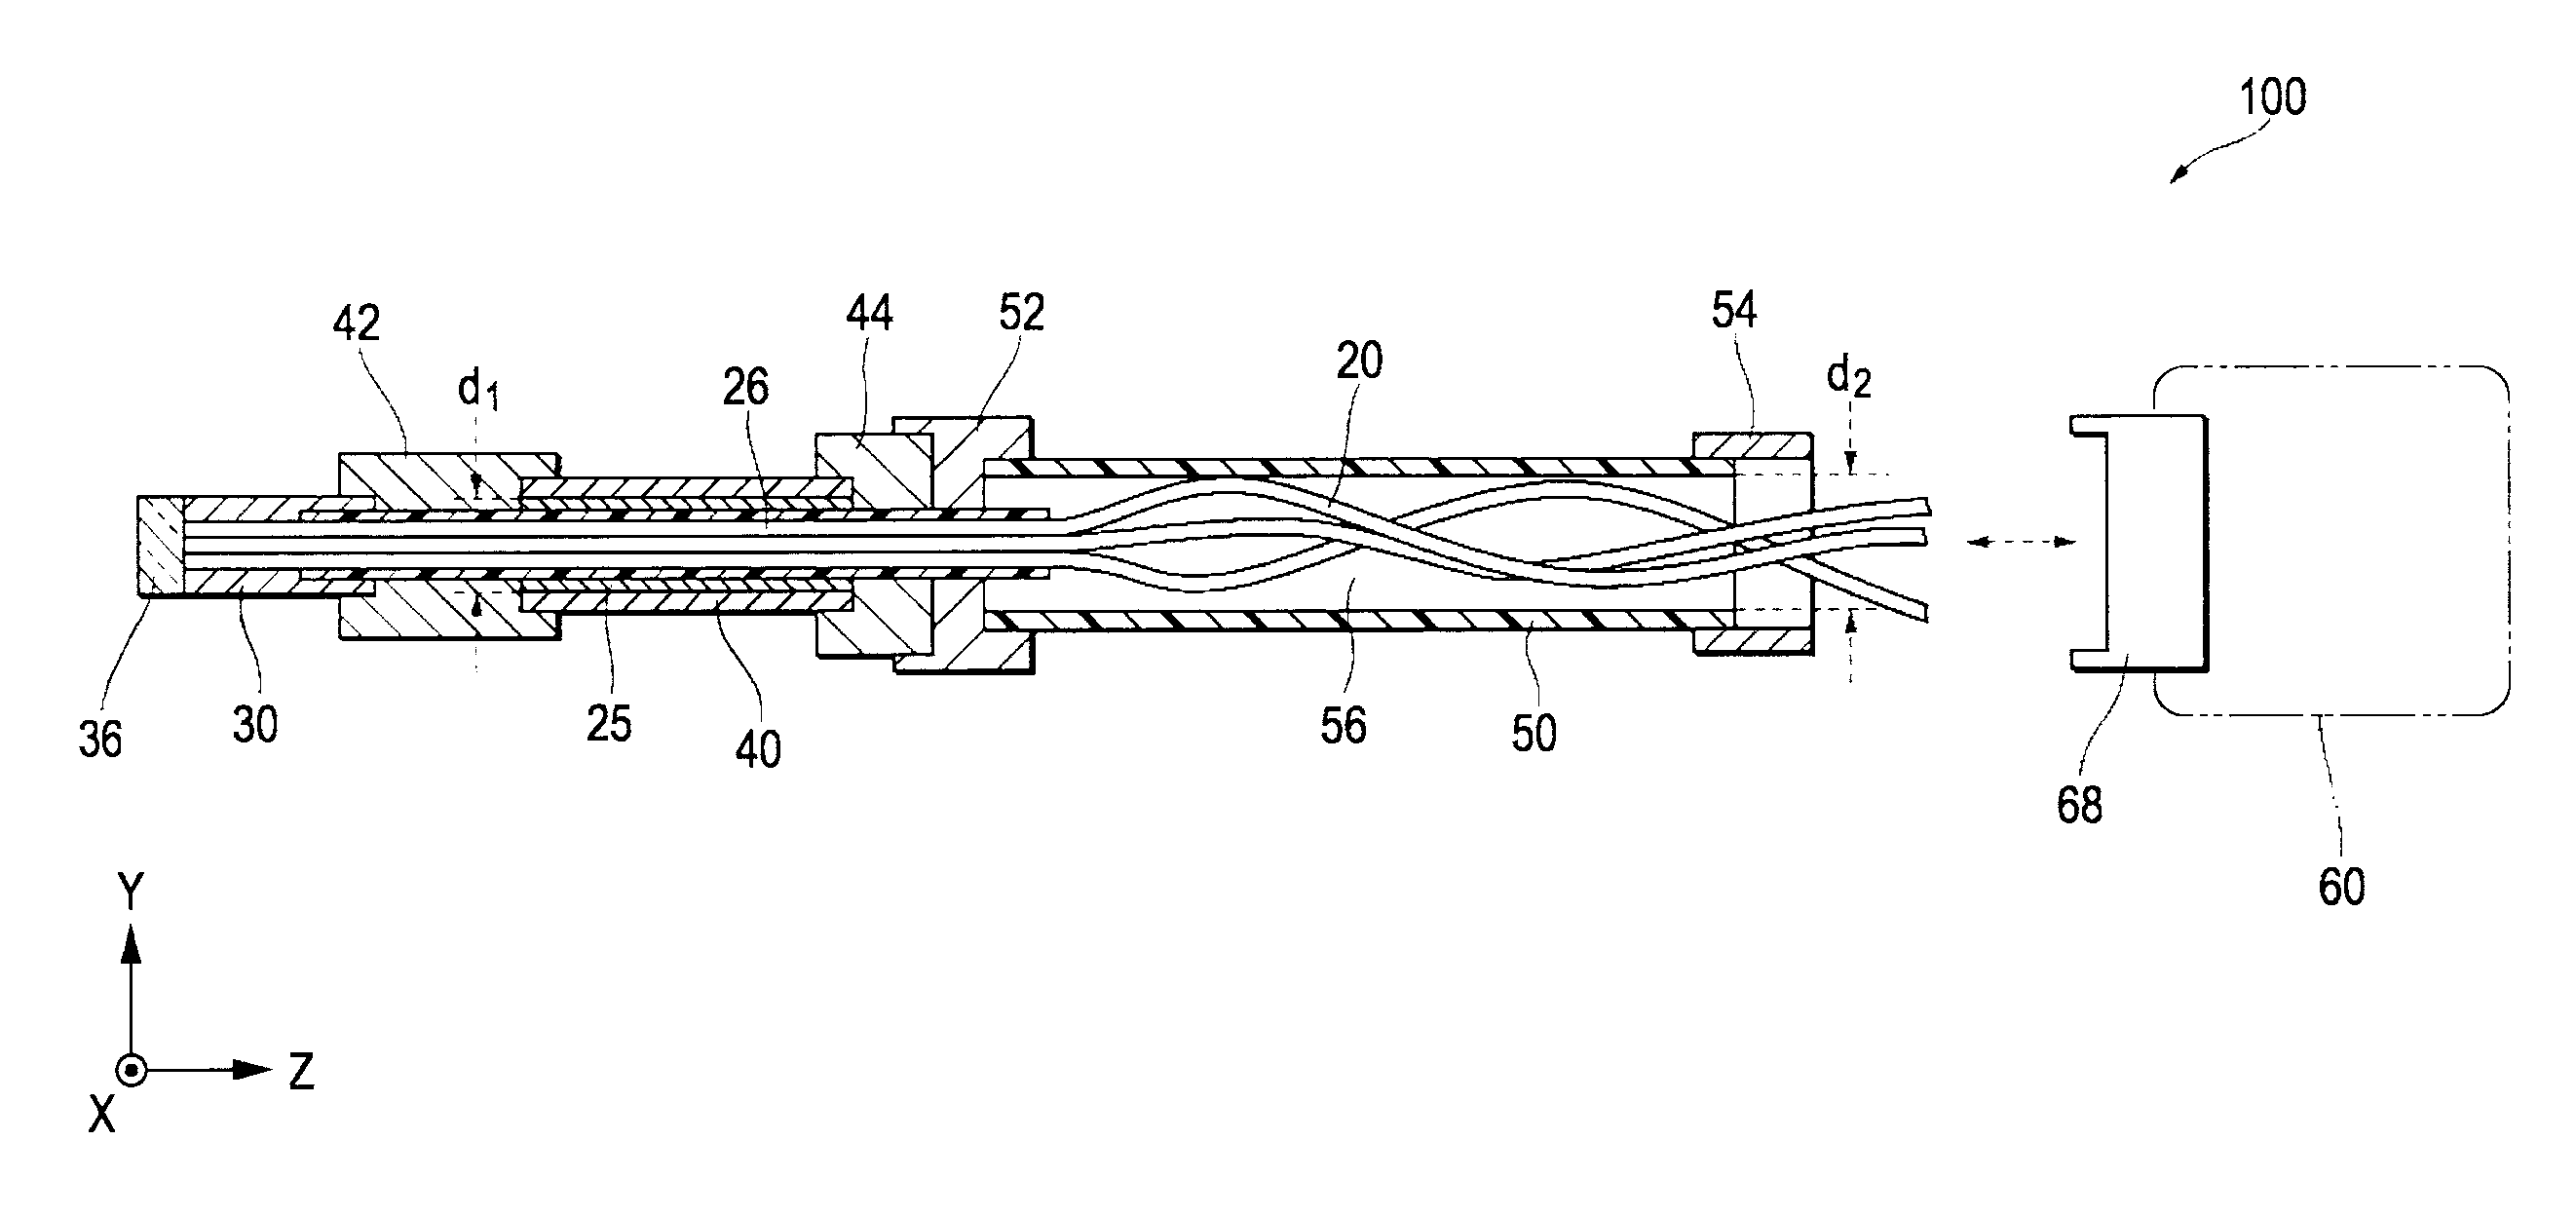 Photoelectric encoder including detection head and a plurality of fibers within a first and second cable